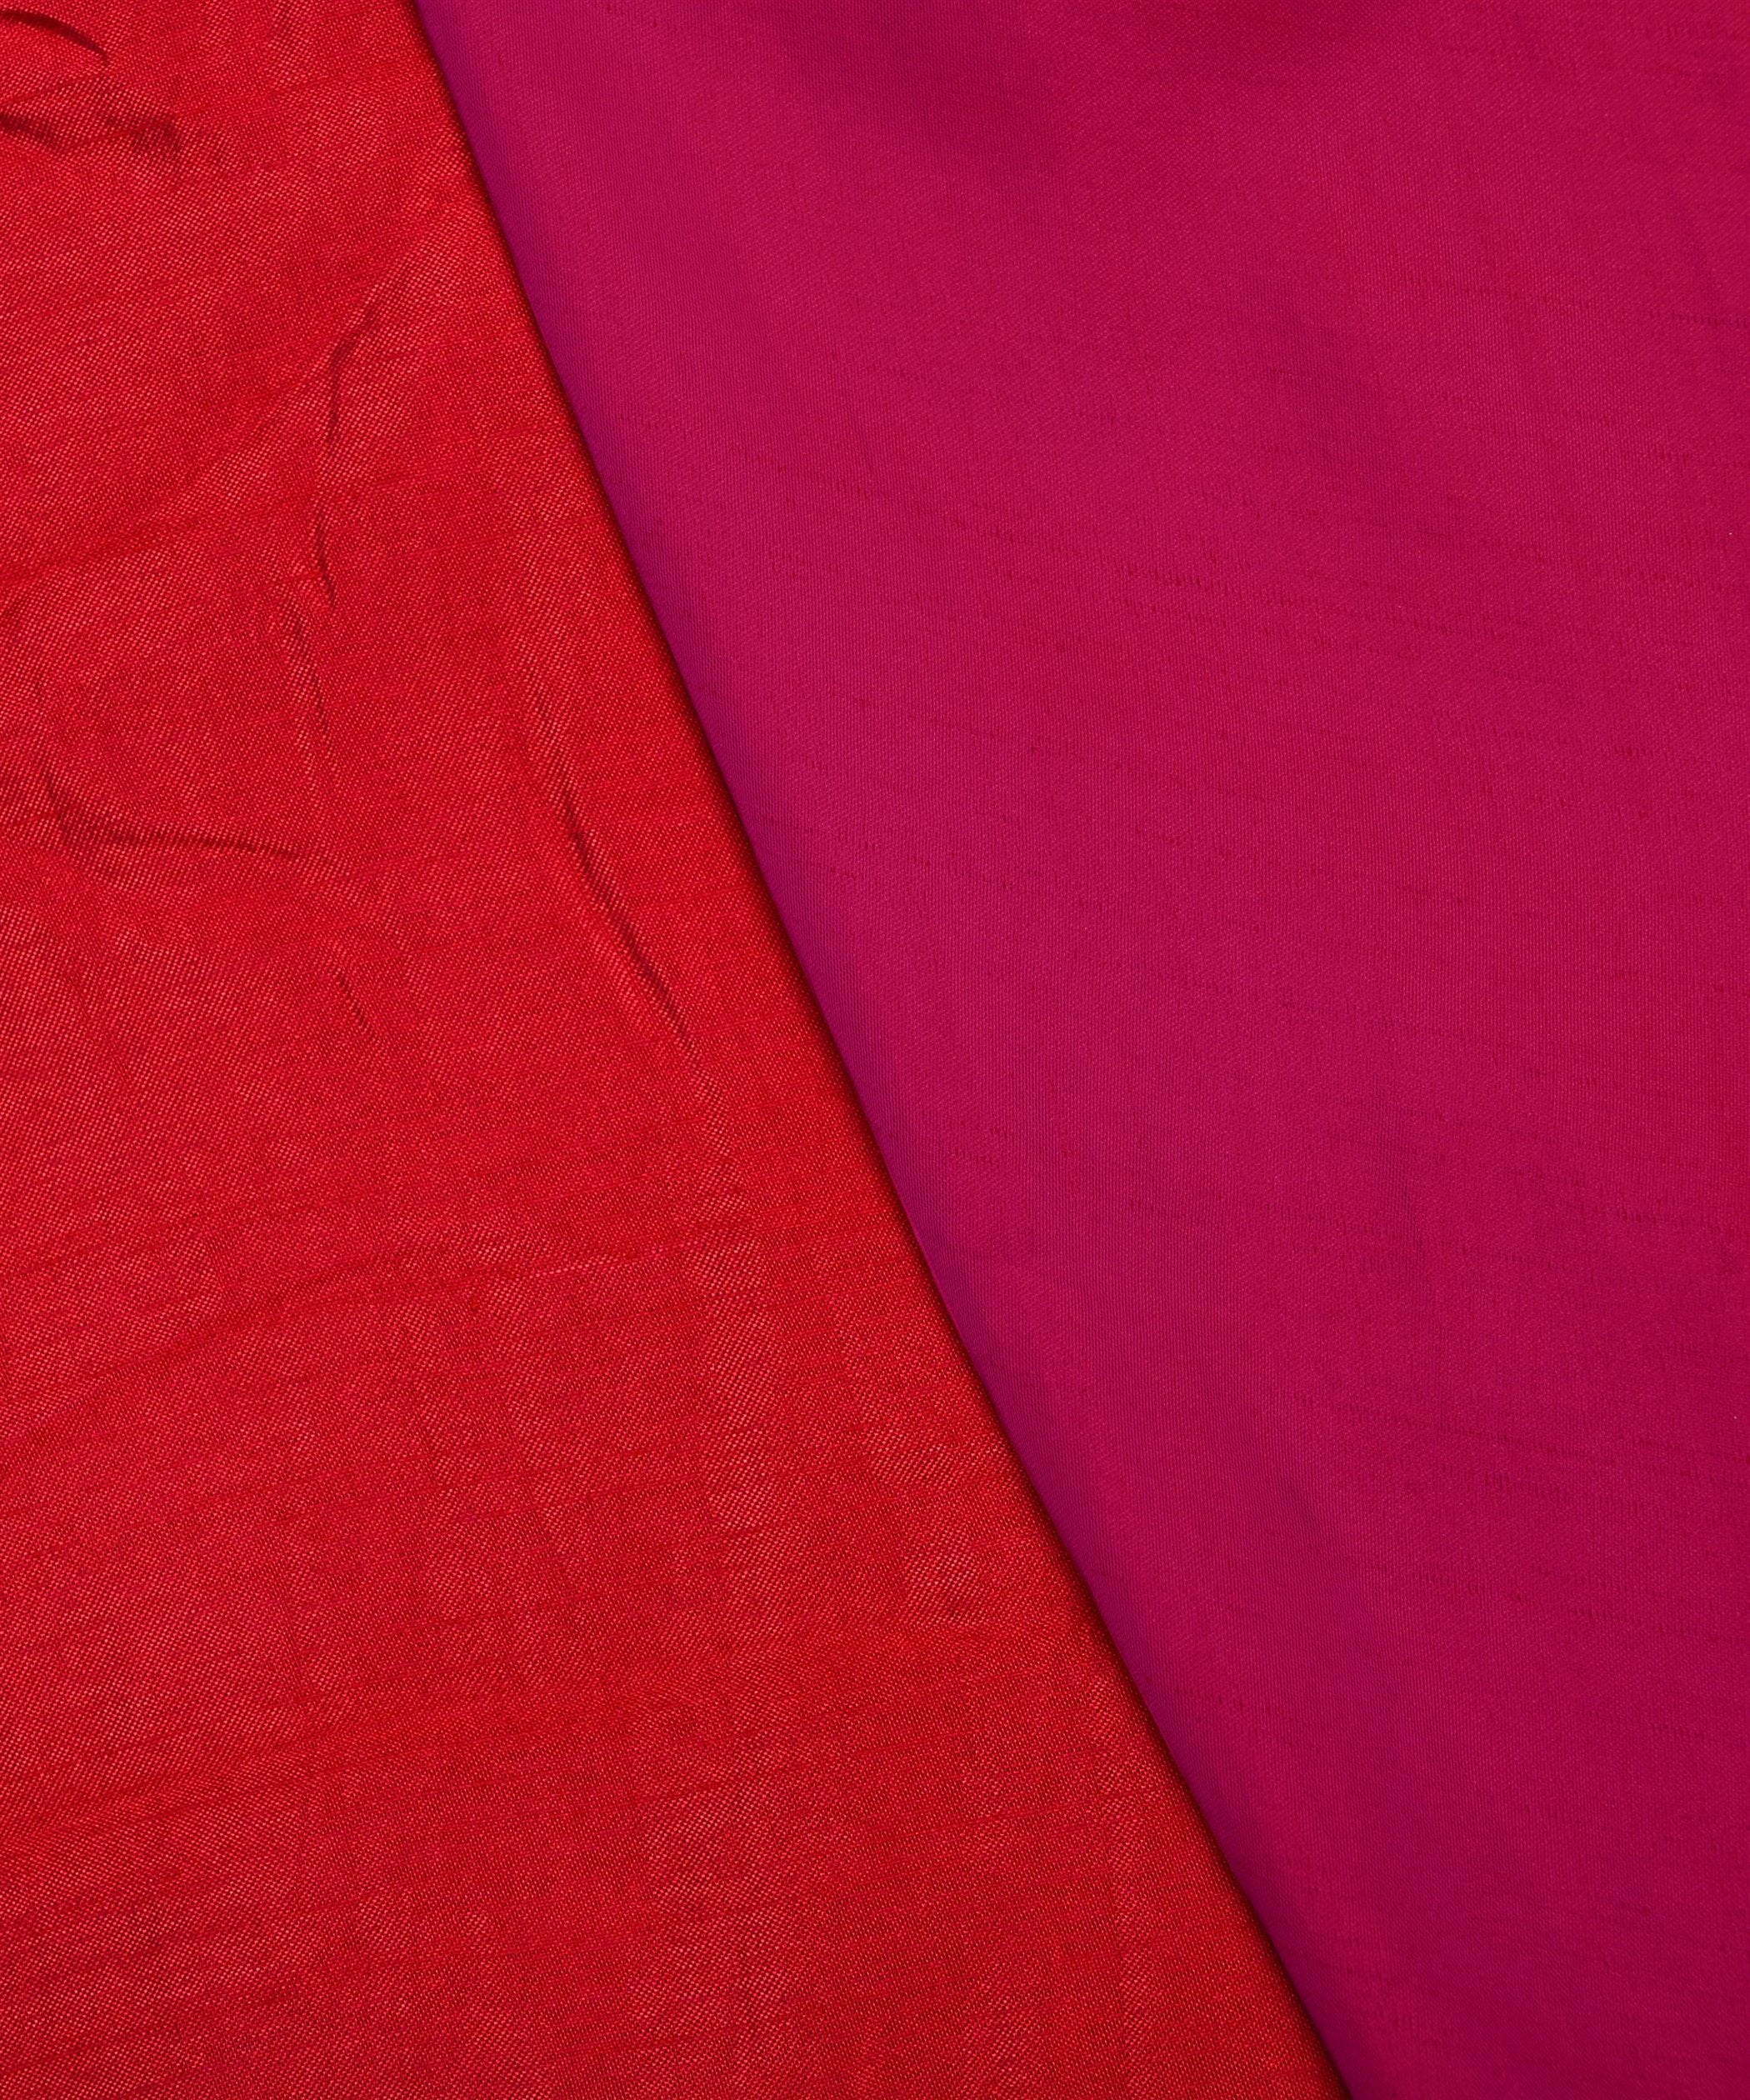 Hot Pink Plain Dyed Two Tone Satin Silk Fabric